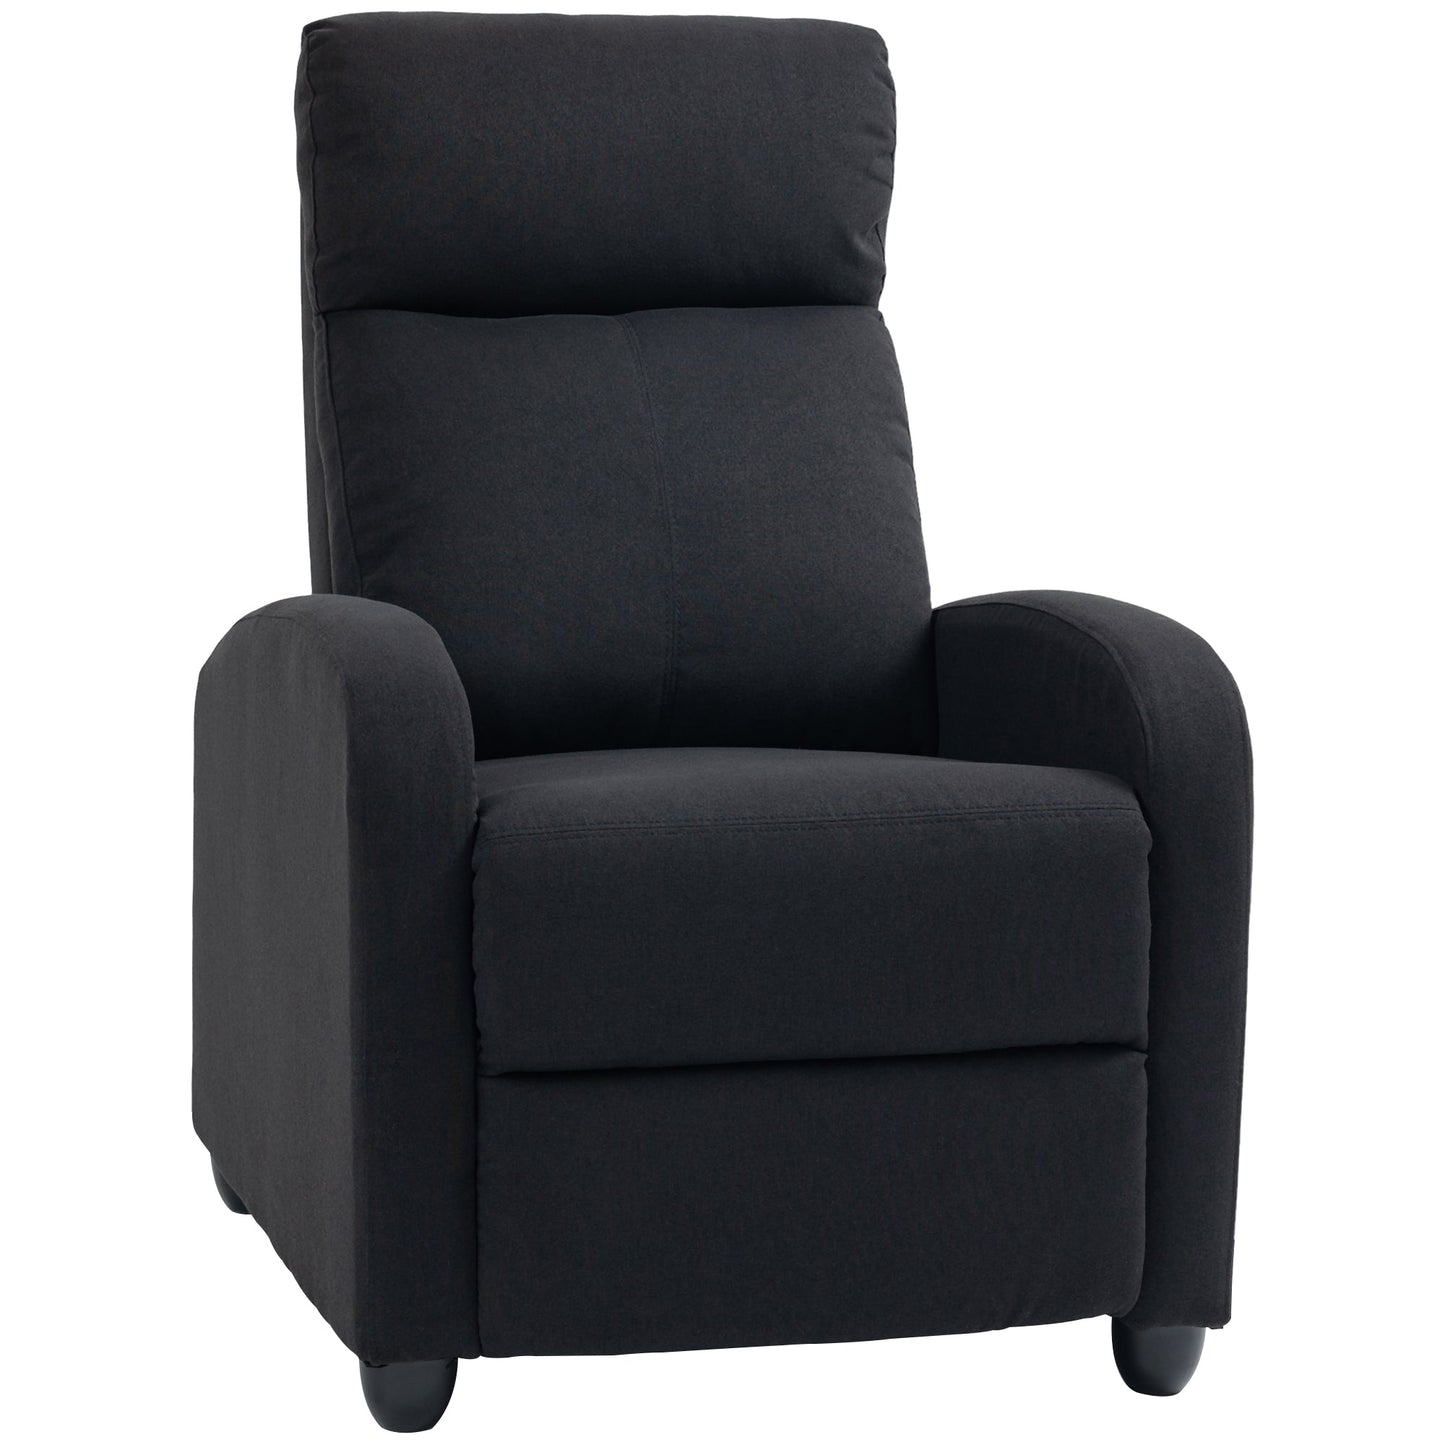 Fabric Recliner Chair, Manual Home Theater Seating, Single Reclining Sofa Chair with Padded Seat for Living Room, Black - Gallery Canada